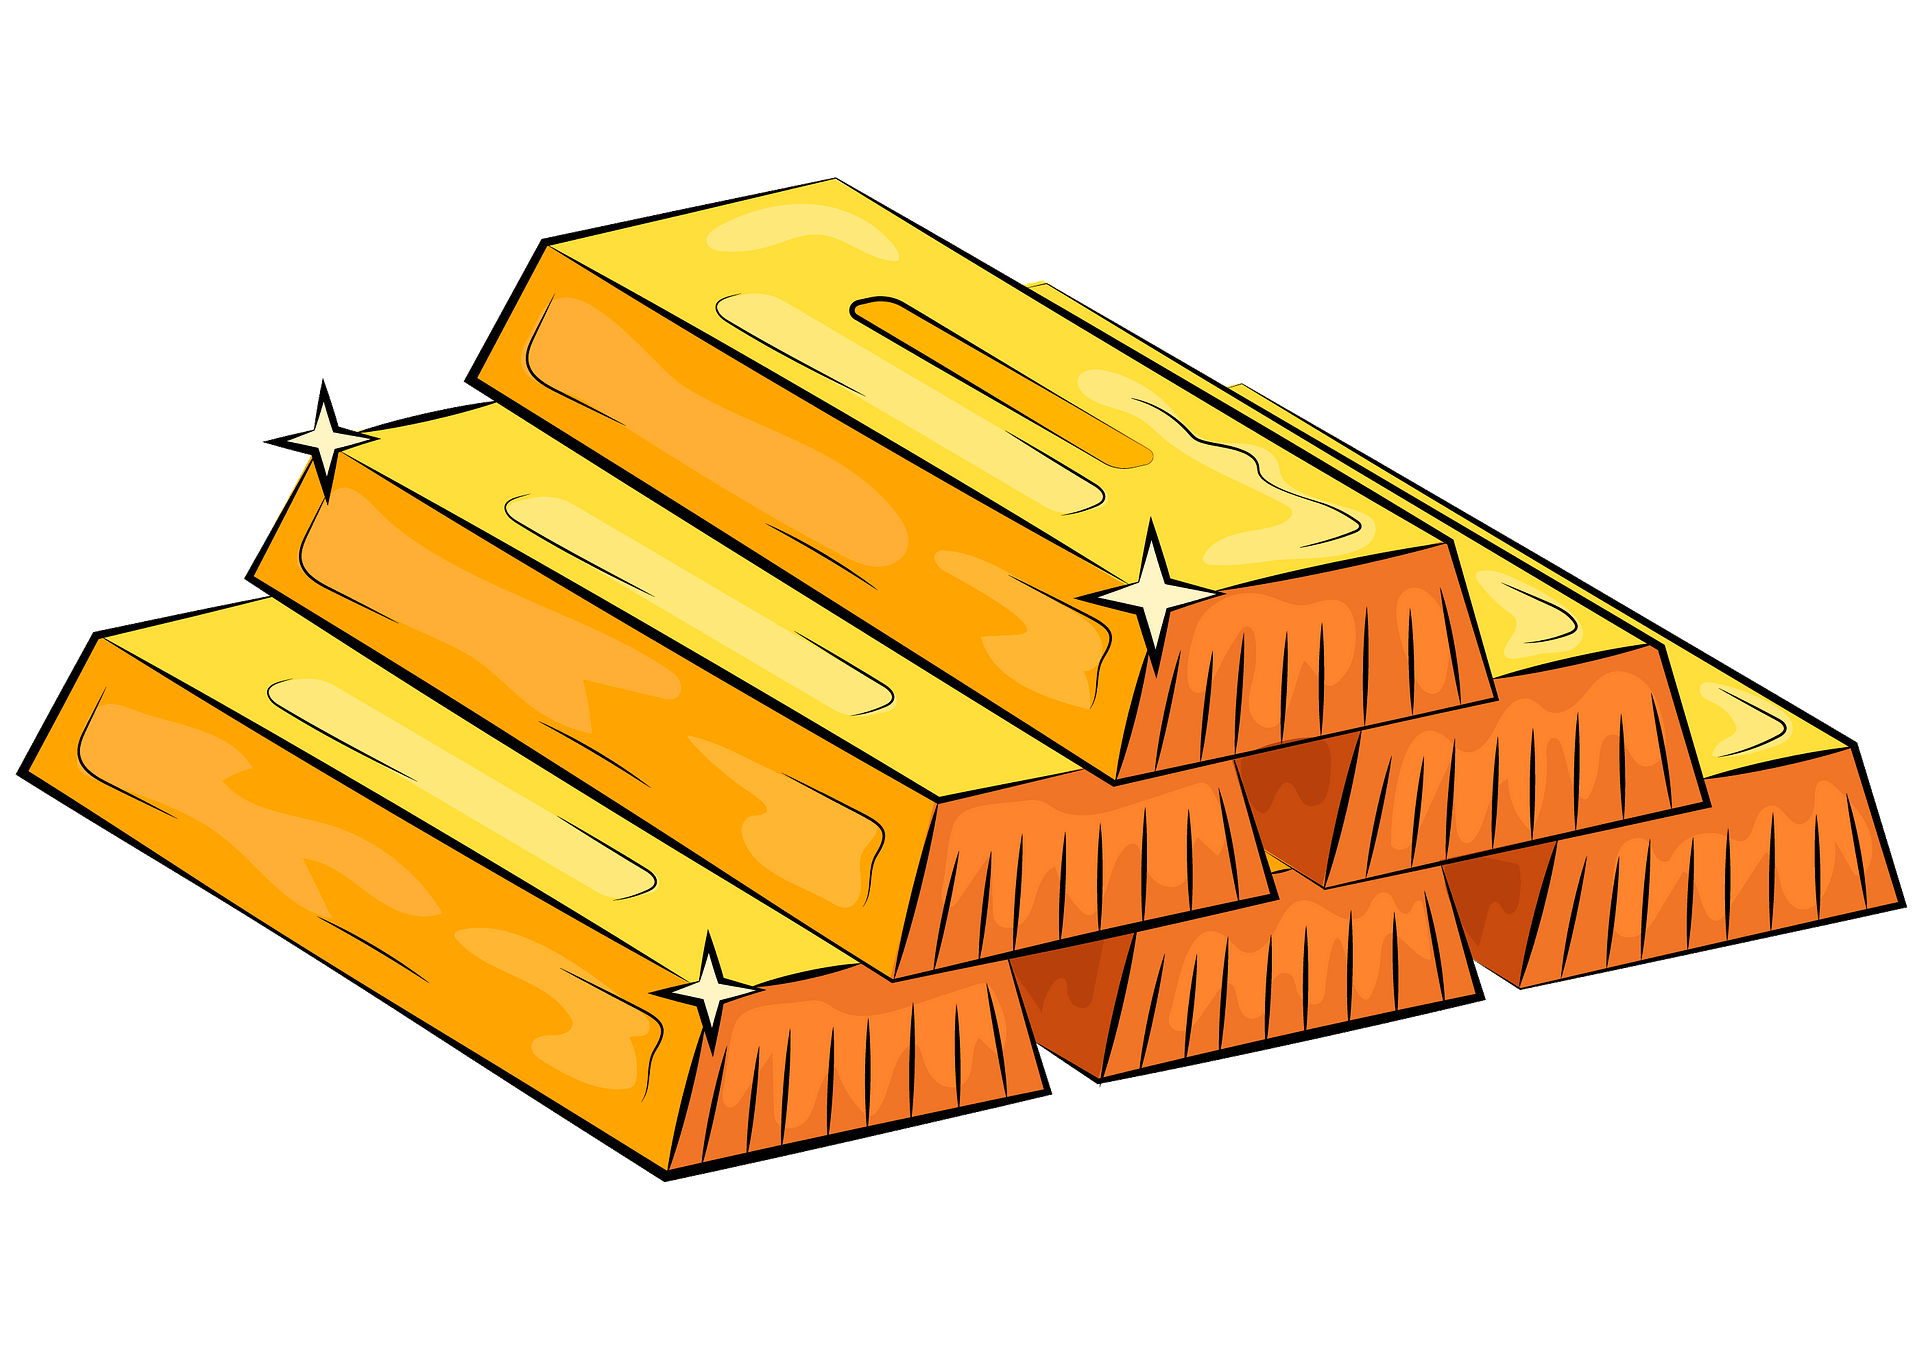 Clipart of gold bars arranged in a pyramid shape.